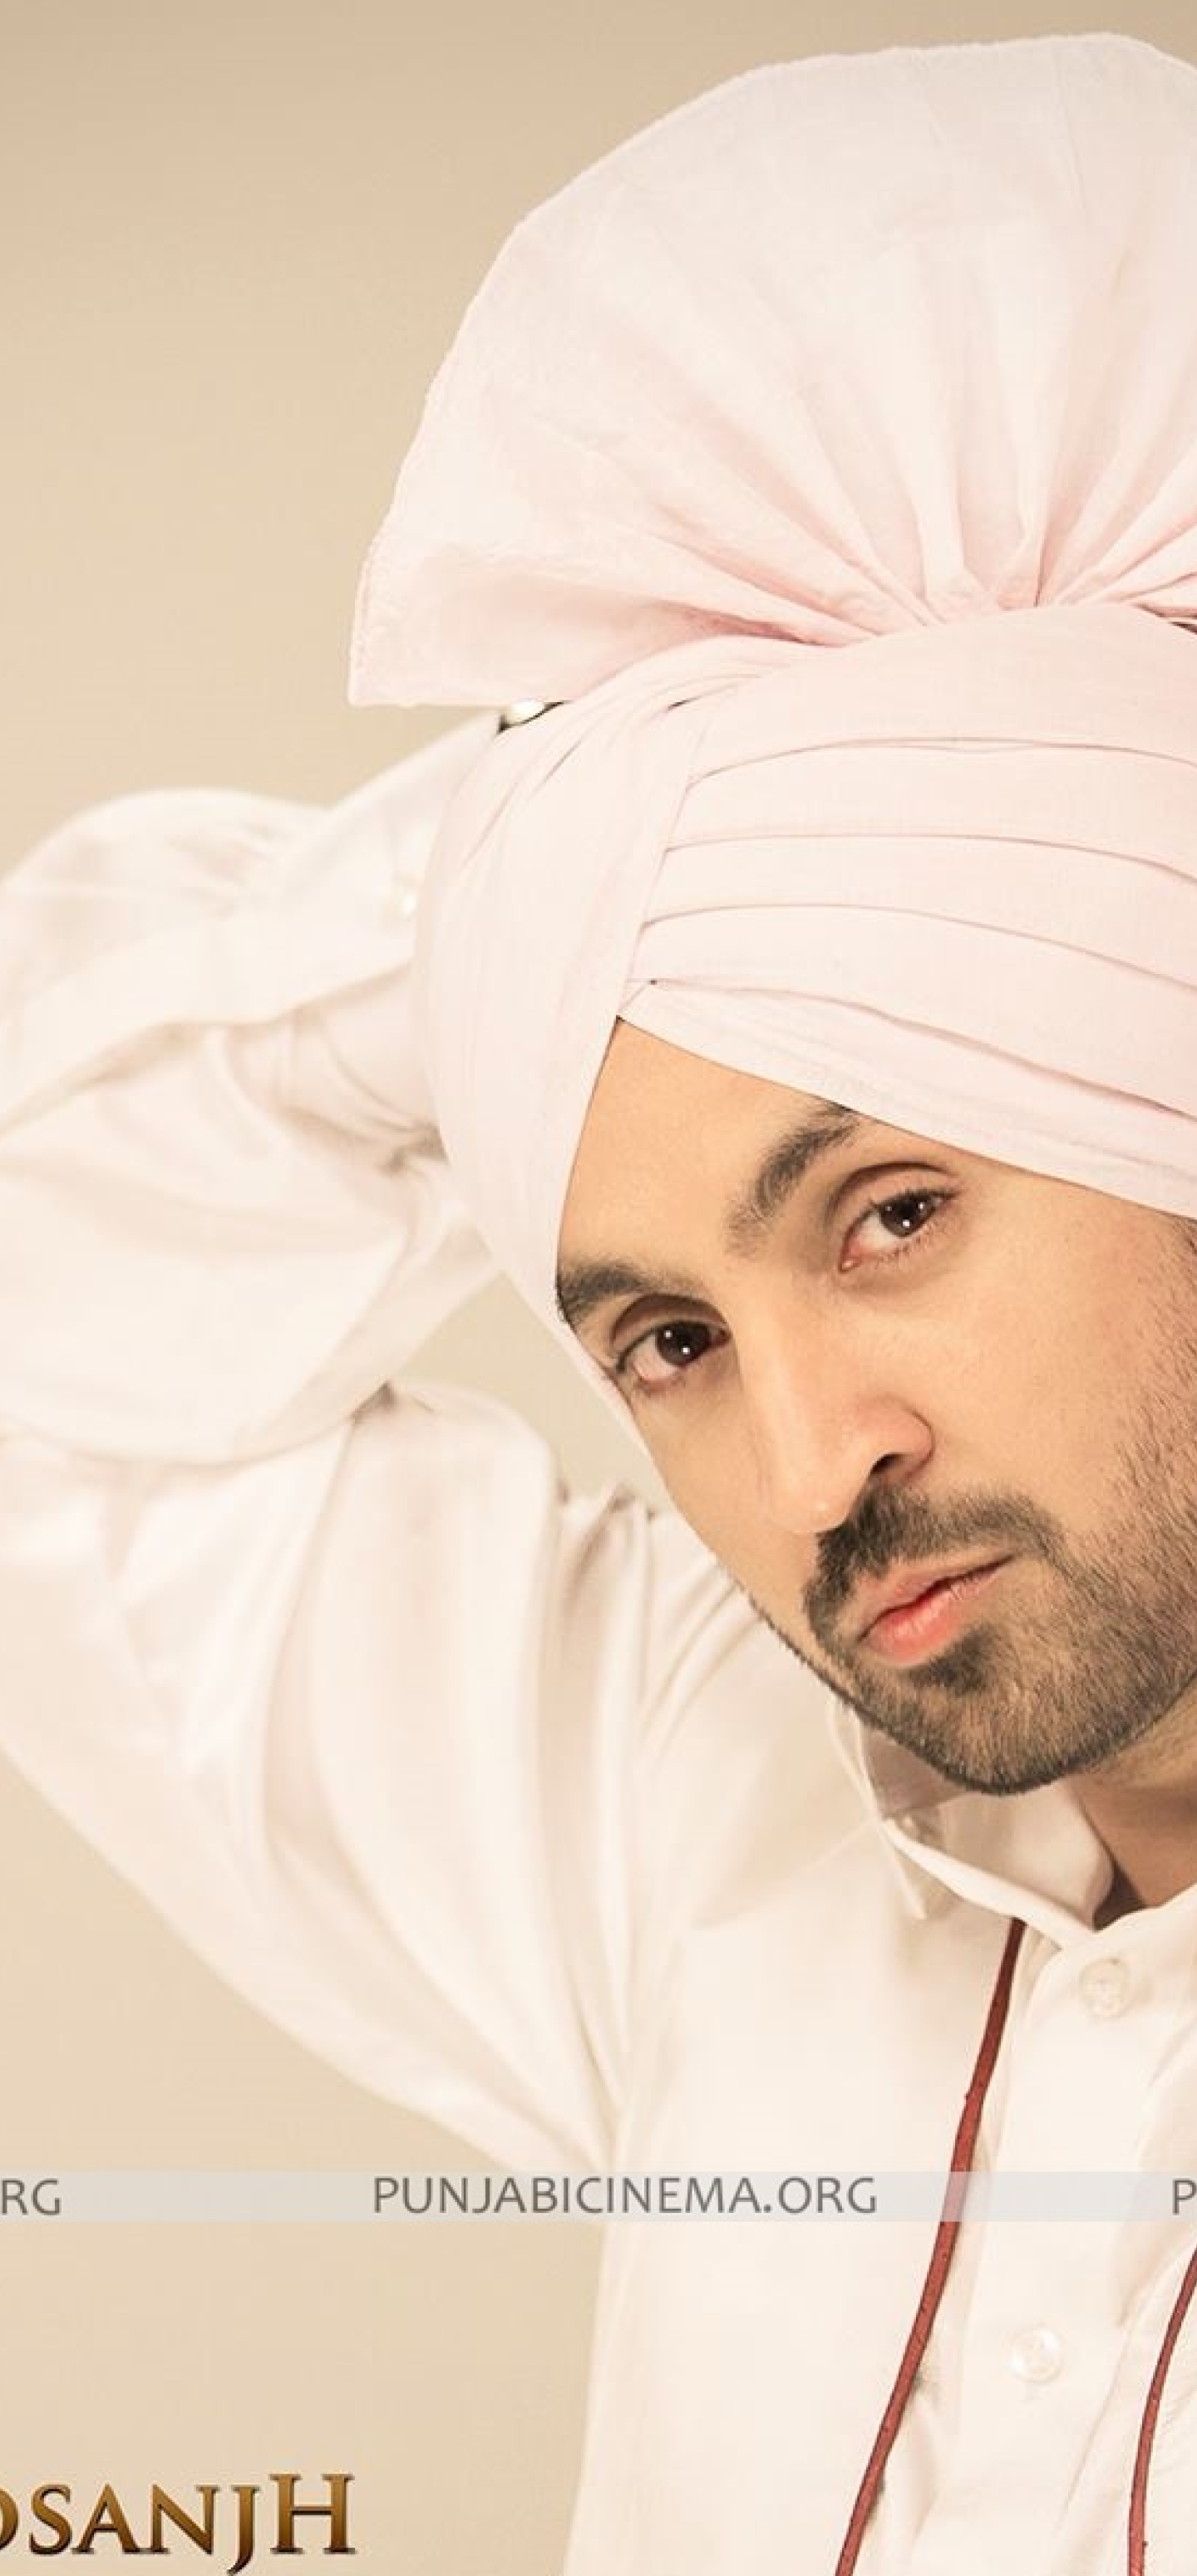 1440x3100 Diljit Dosanjh new photos 1440x3100 Resolution Wallpaper, HD  Celebrities 4K Wallpapers, Images, Photos and Background - Wallpapers Den